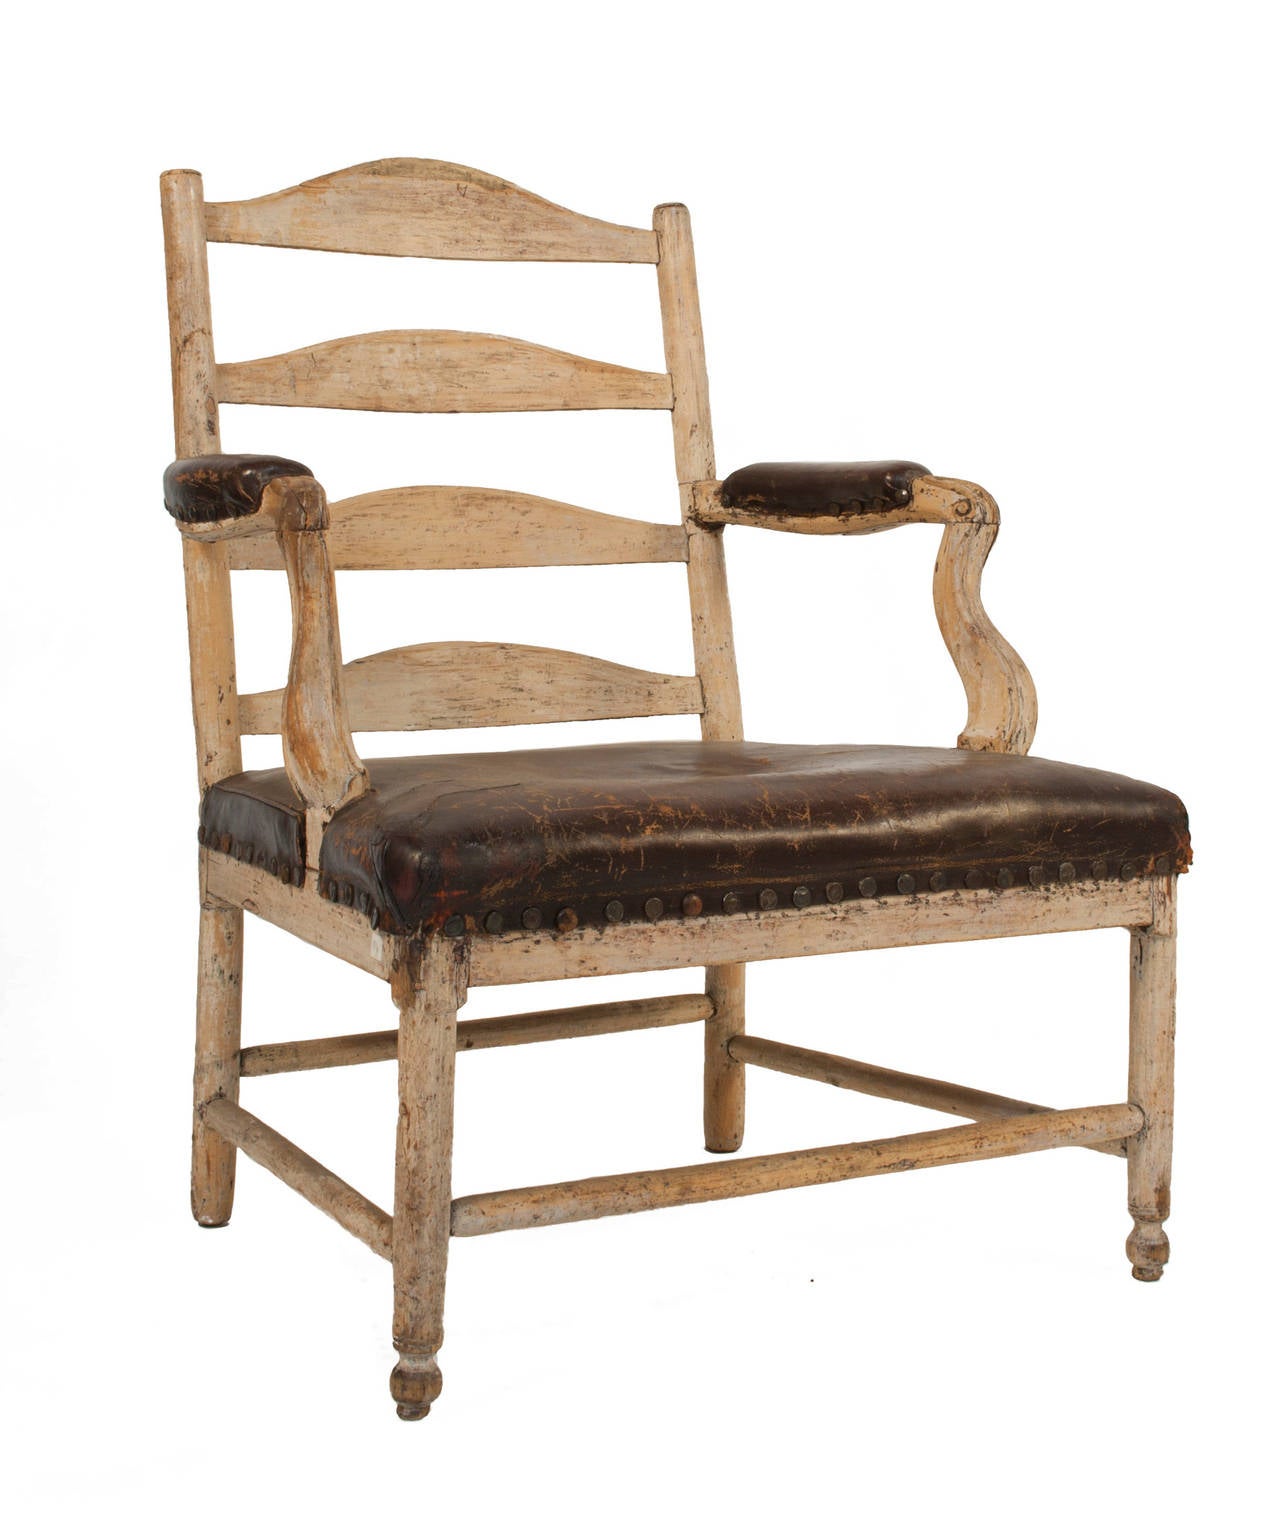 Open back gustavian grips holm arm-chair with leather seat and arm rest in a worn pale cream colored patina.